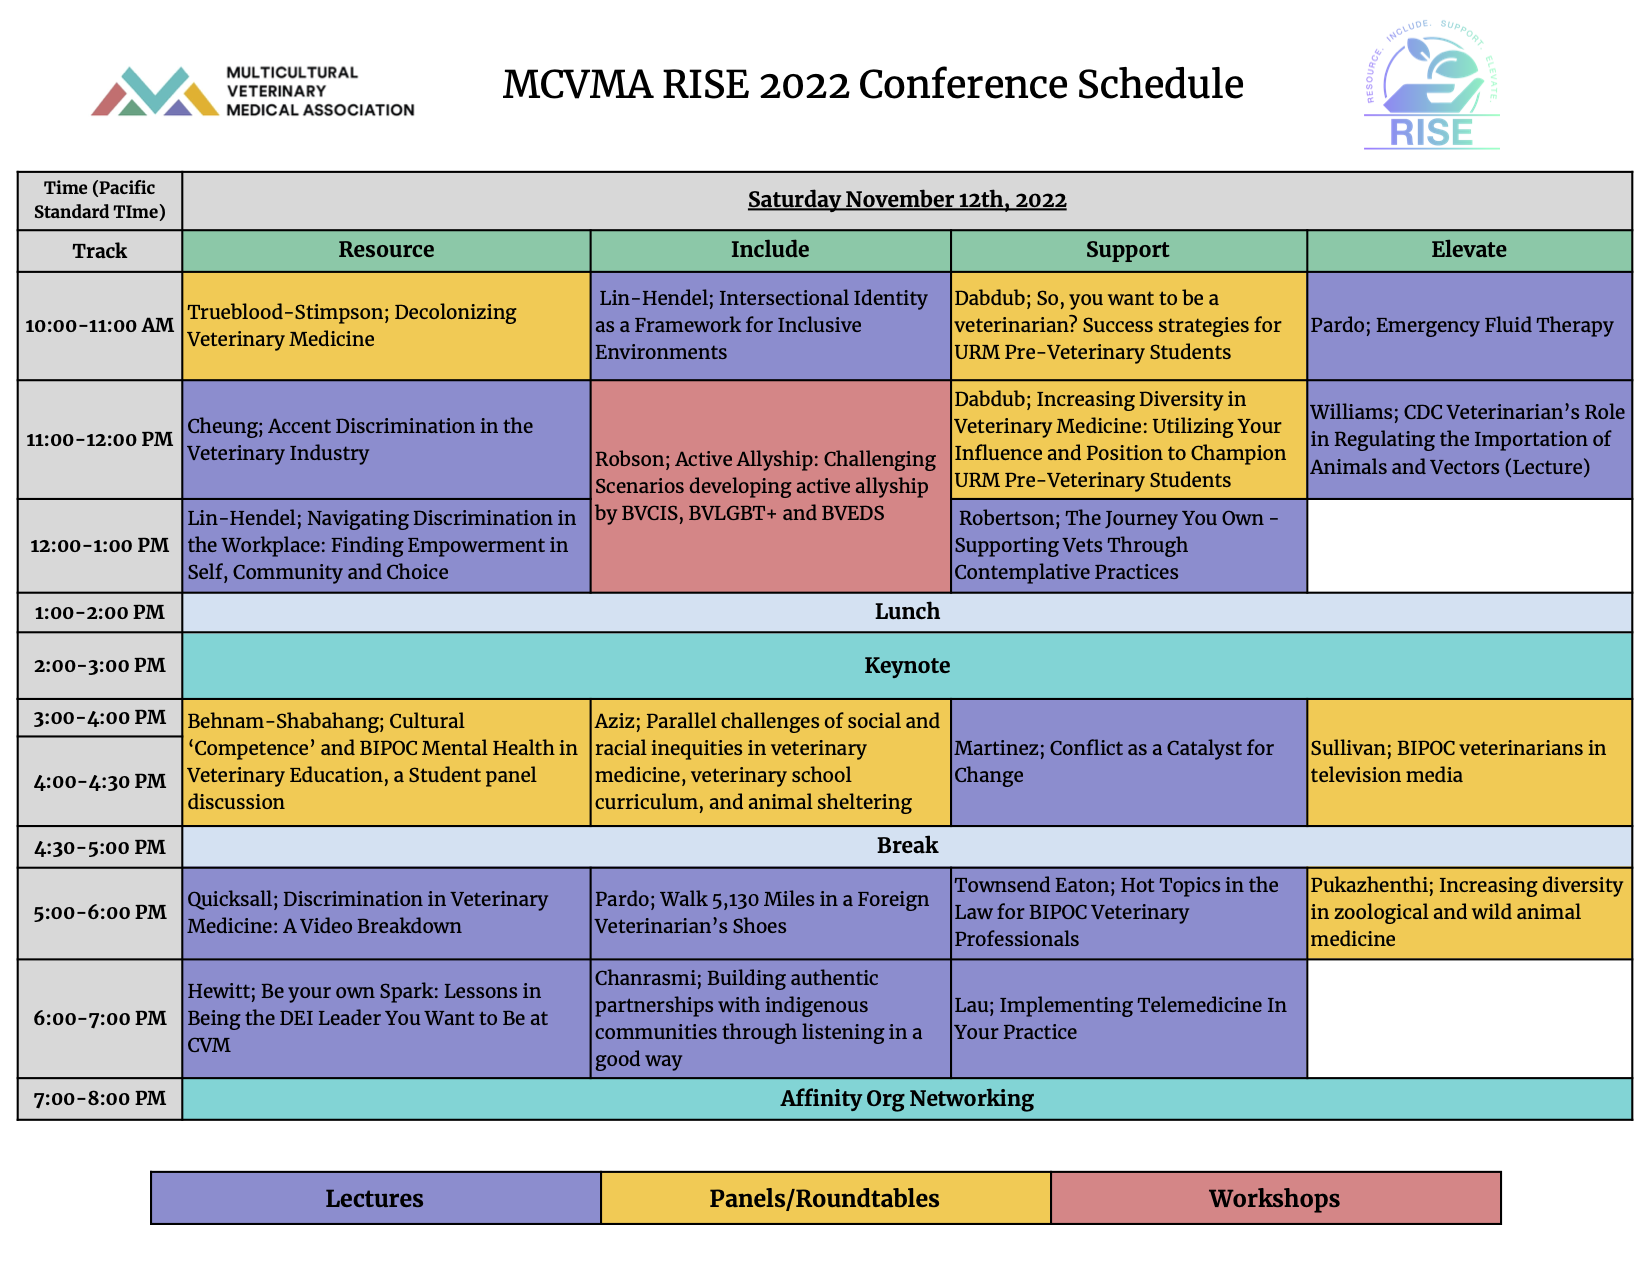 RISE Conference Schedule 2022 Multicultural Veterinary Medical